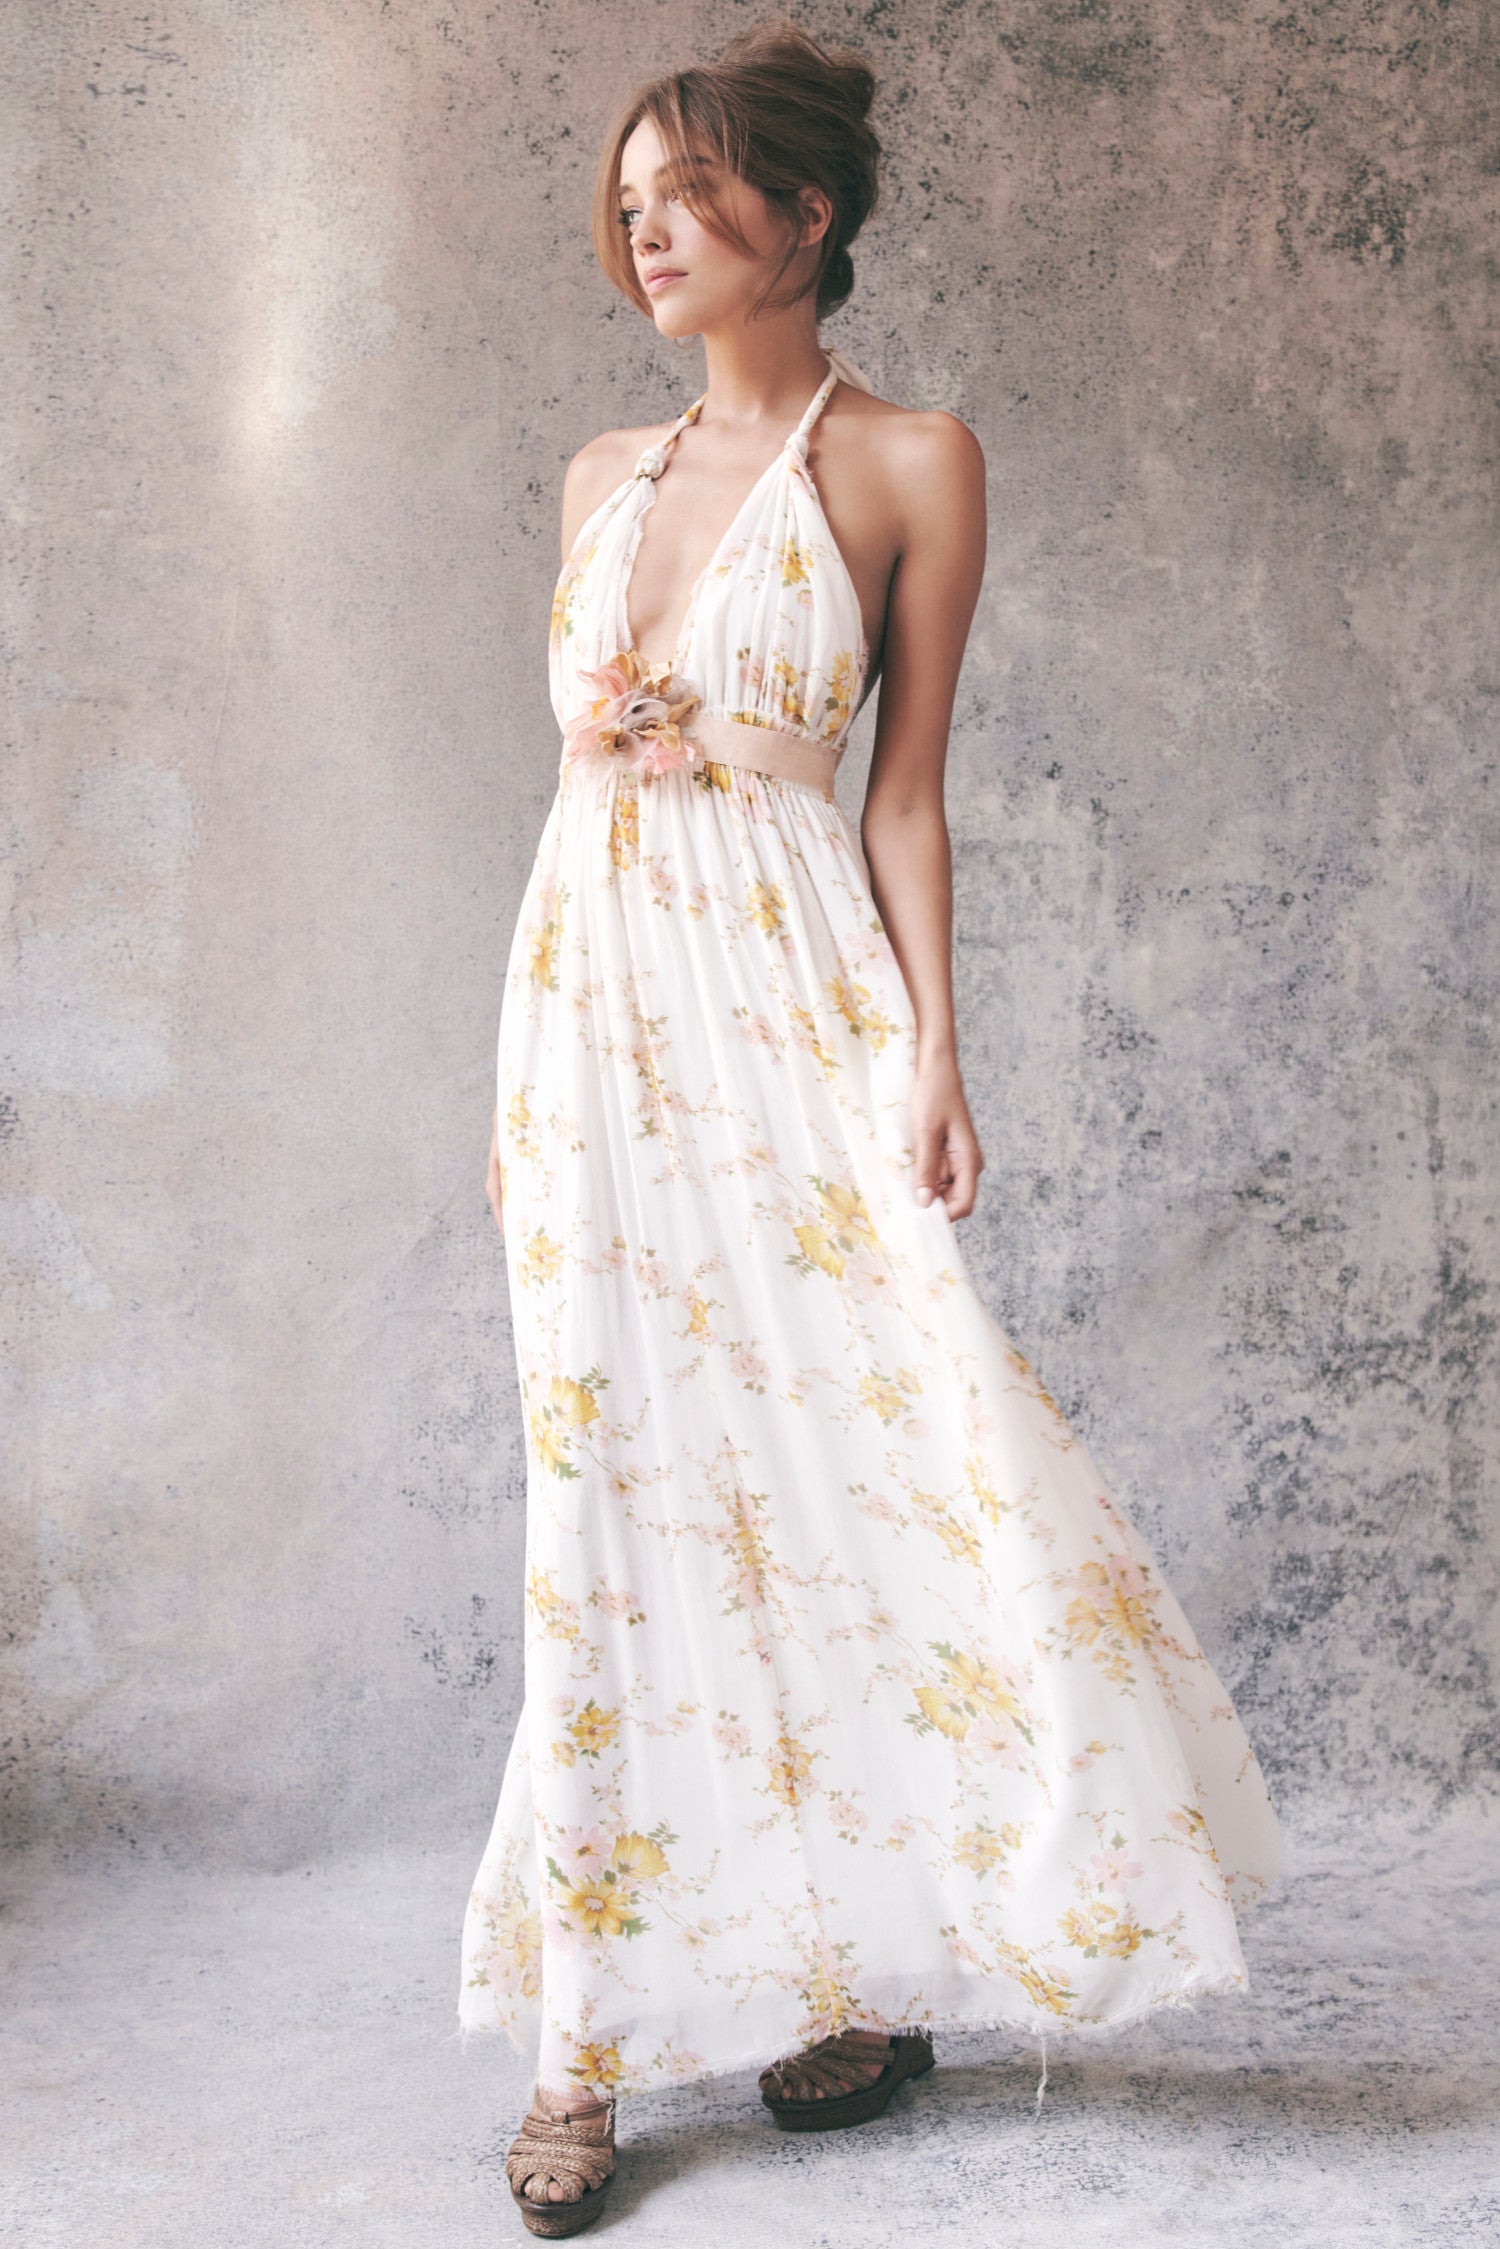 Model wearing white and yellow floral halter maxi dress